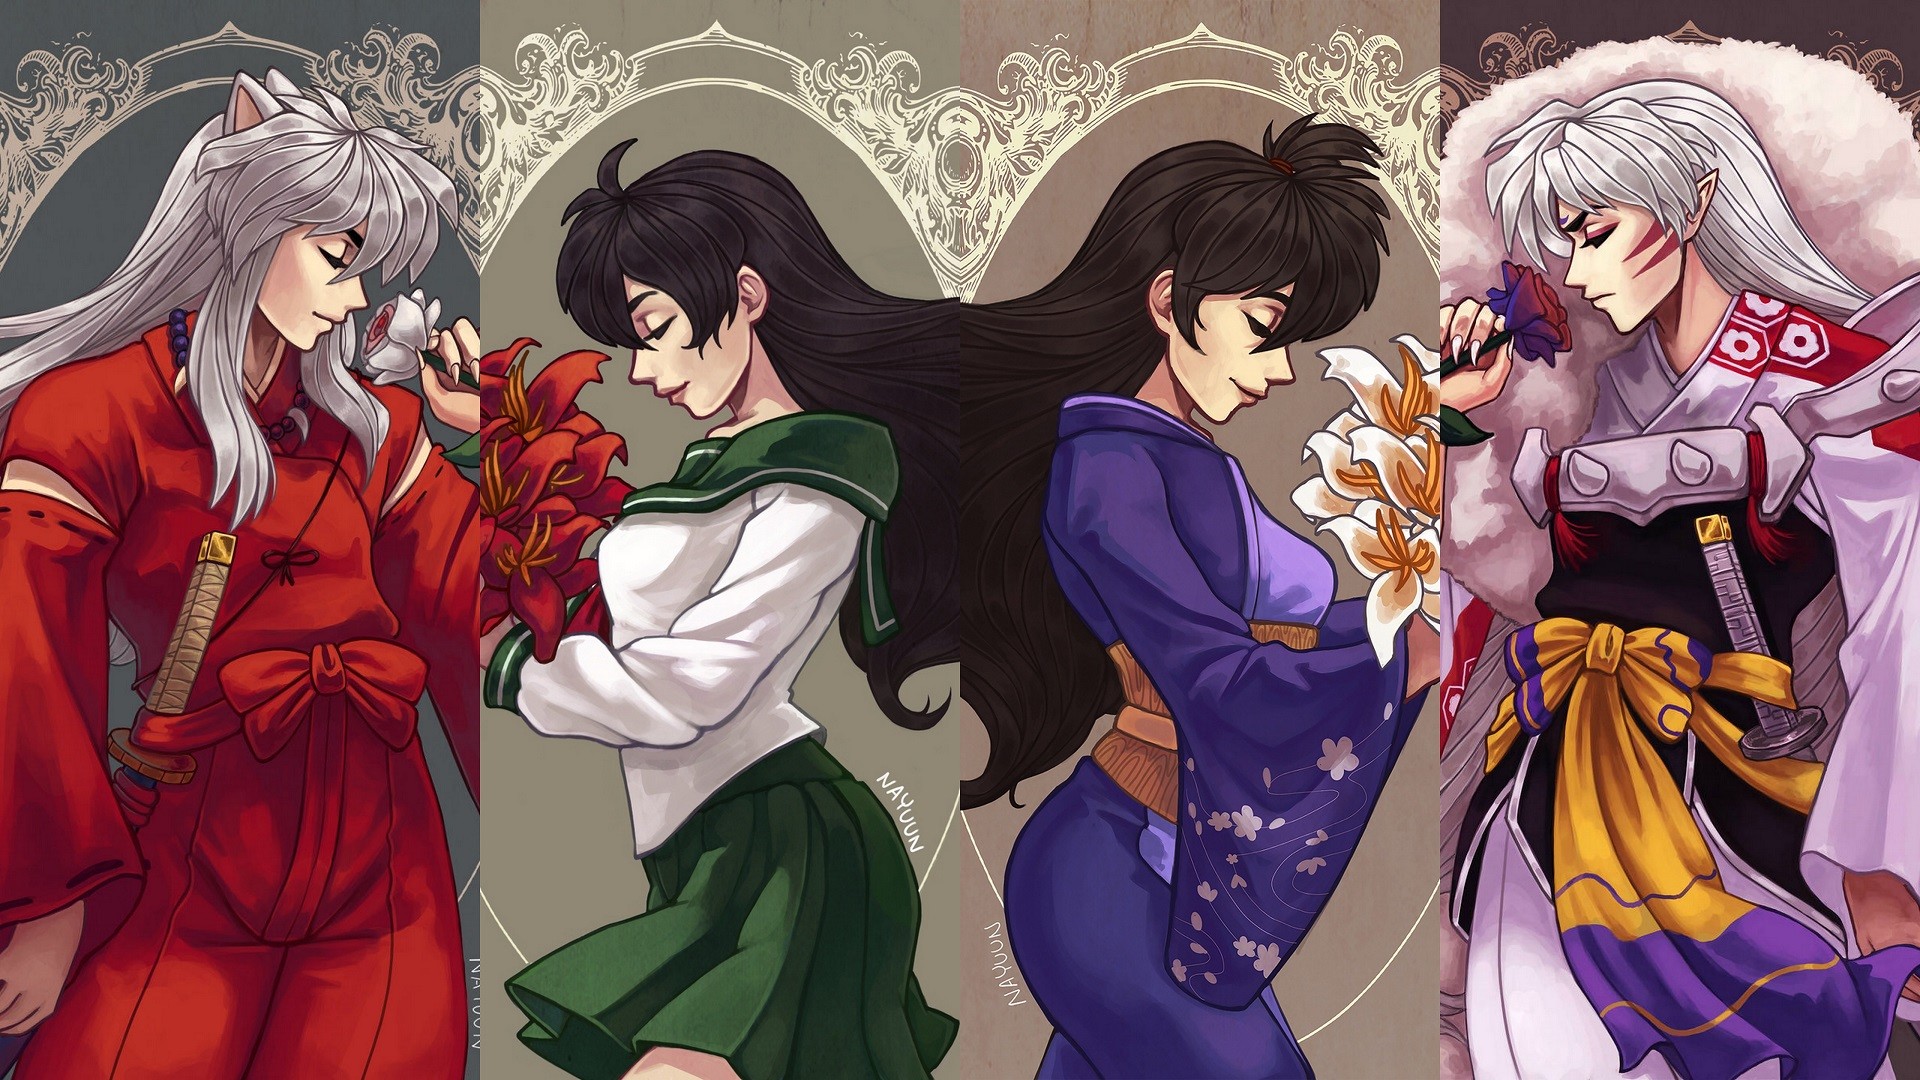 1920x1080 InuYasha HD Wallpaper | Background Image |  | ID:988924 - Wallpaper  Abyss